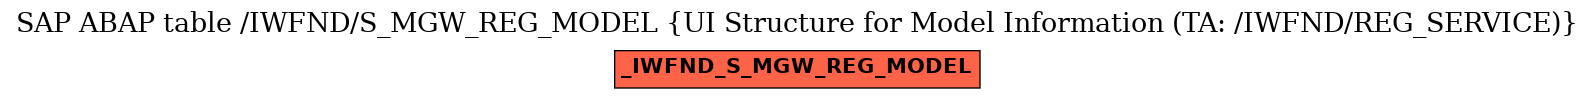 E-R Diagram for table /IWFND/S_MGW_REG_MODEL (UI Structure for Model Information (TA: /IWFND/REG_SERVICE))